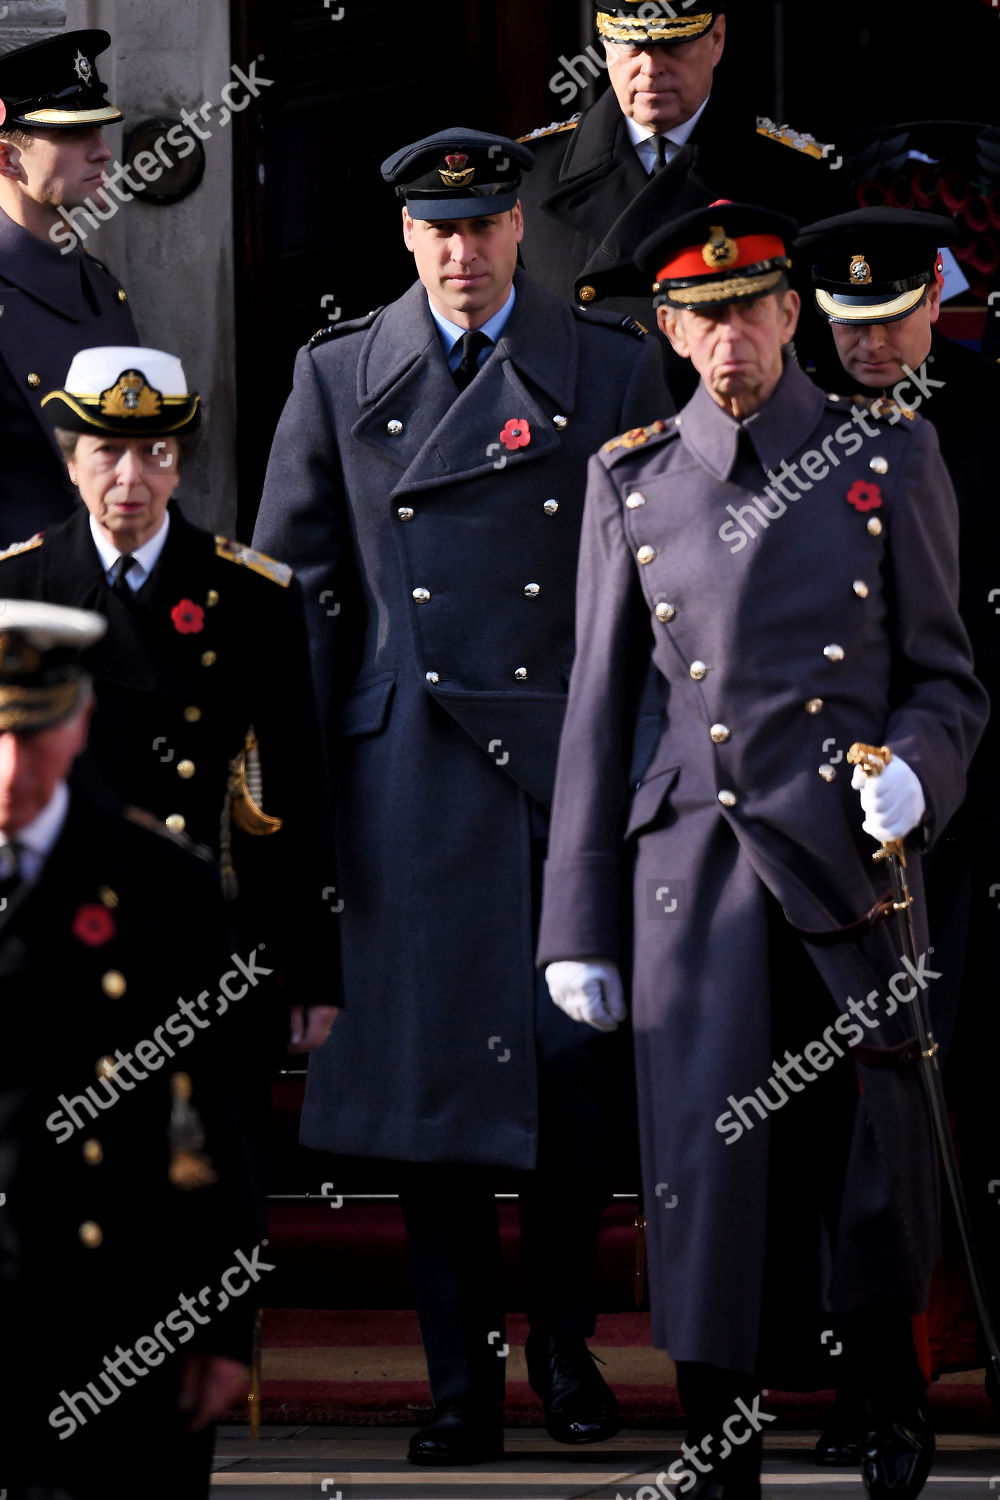 remembrance-day-service-the-cenotaph-whitehall-london-uk-shutterstock-editorial-10469662db.jpg